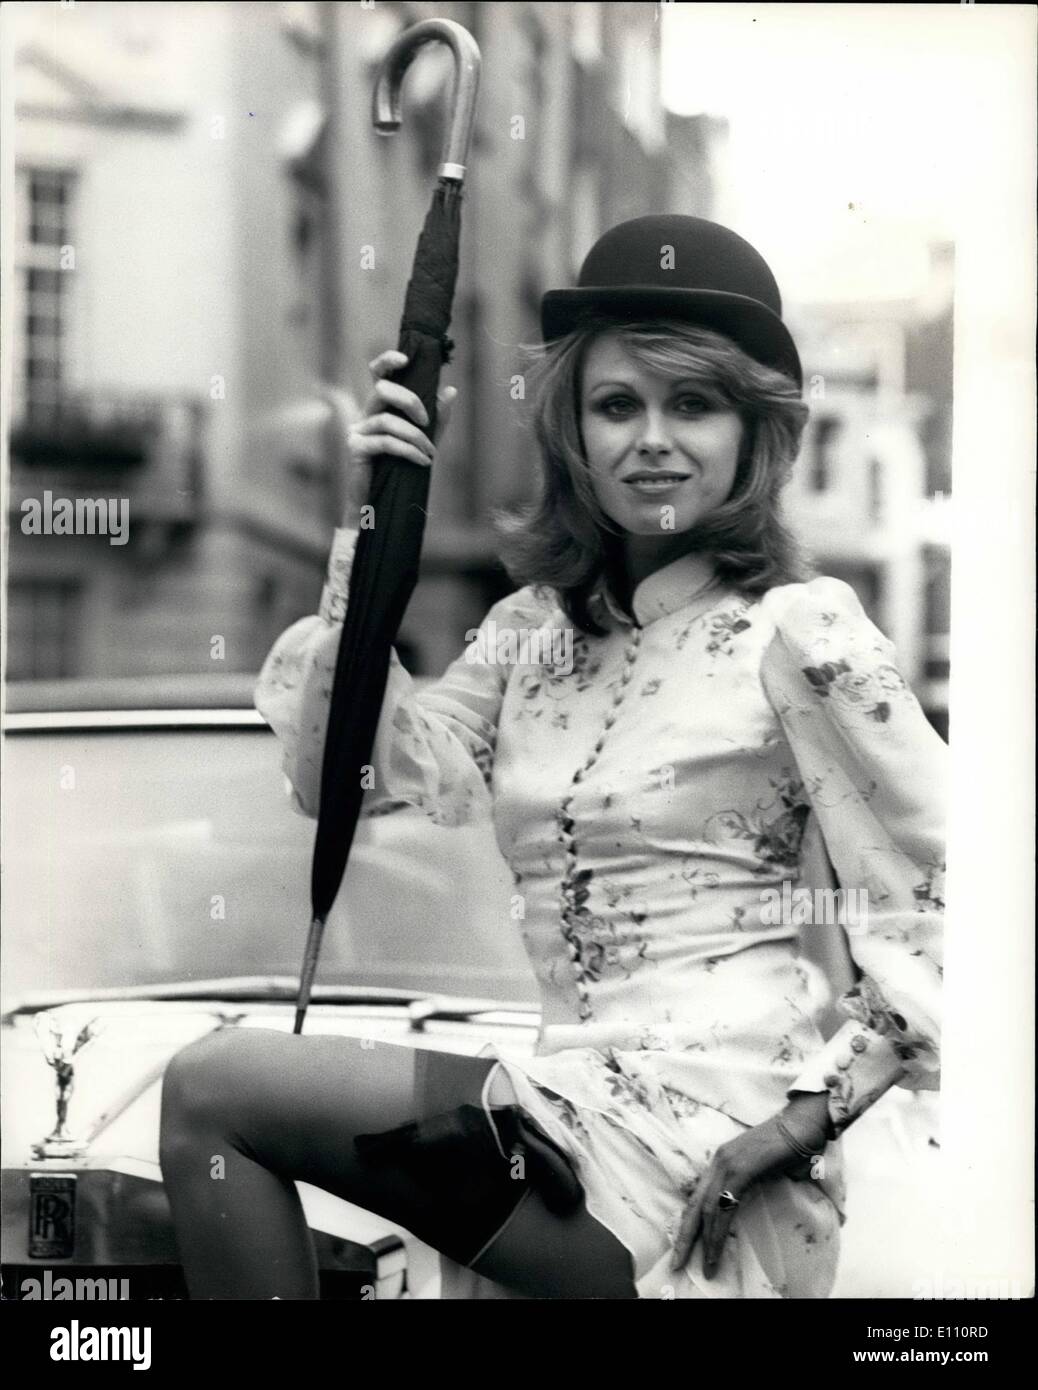 Mar. 03, 1975 - Actress Joanna Lumley Is The New ''AVENGERS'' Girl: Joanna Lumley, the delightfully shaped, blonde actress has captured the greatly sought after plum starring role in the return of the AVENGERS, Britain's most successful television series - seen in some 120 countries and scheduled to start filming at Pinewood Studios in April. Patrick McNee will be returning from his Palm Springs home to recreate his immortal role of John Steed, and Gareth Hunt who is currently starring in the National Theatre production of Hamlet, will be Steed's male partner Stock Photo